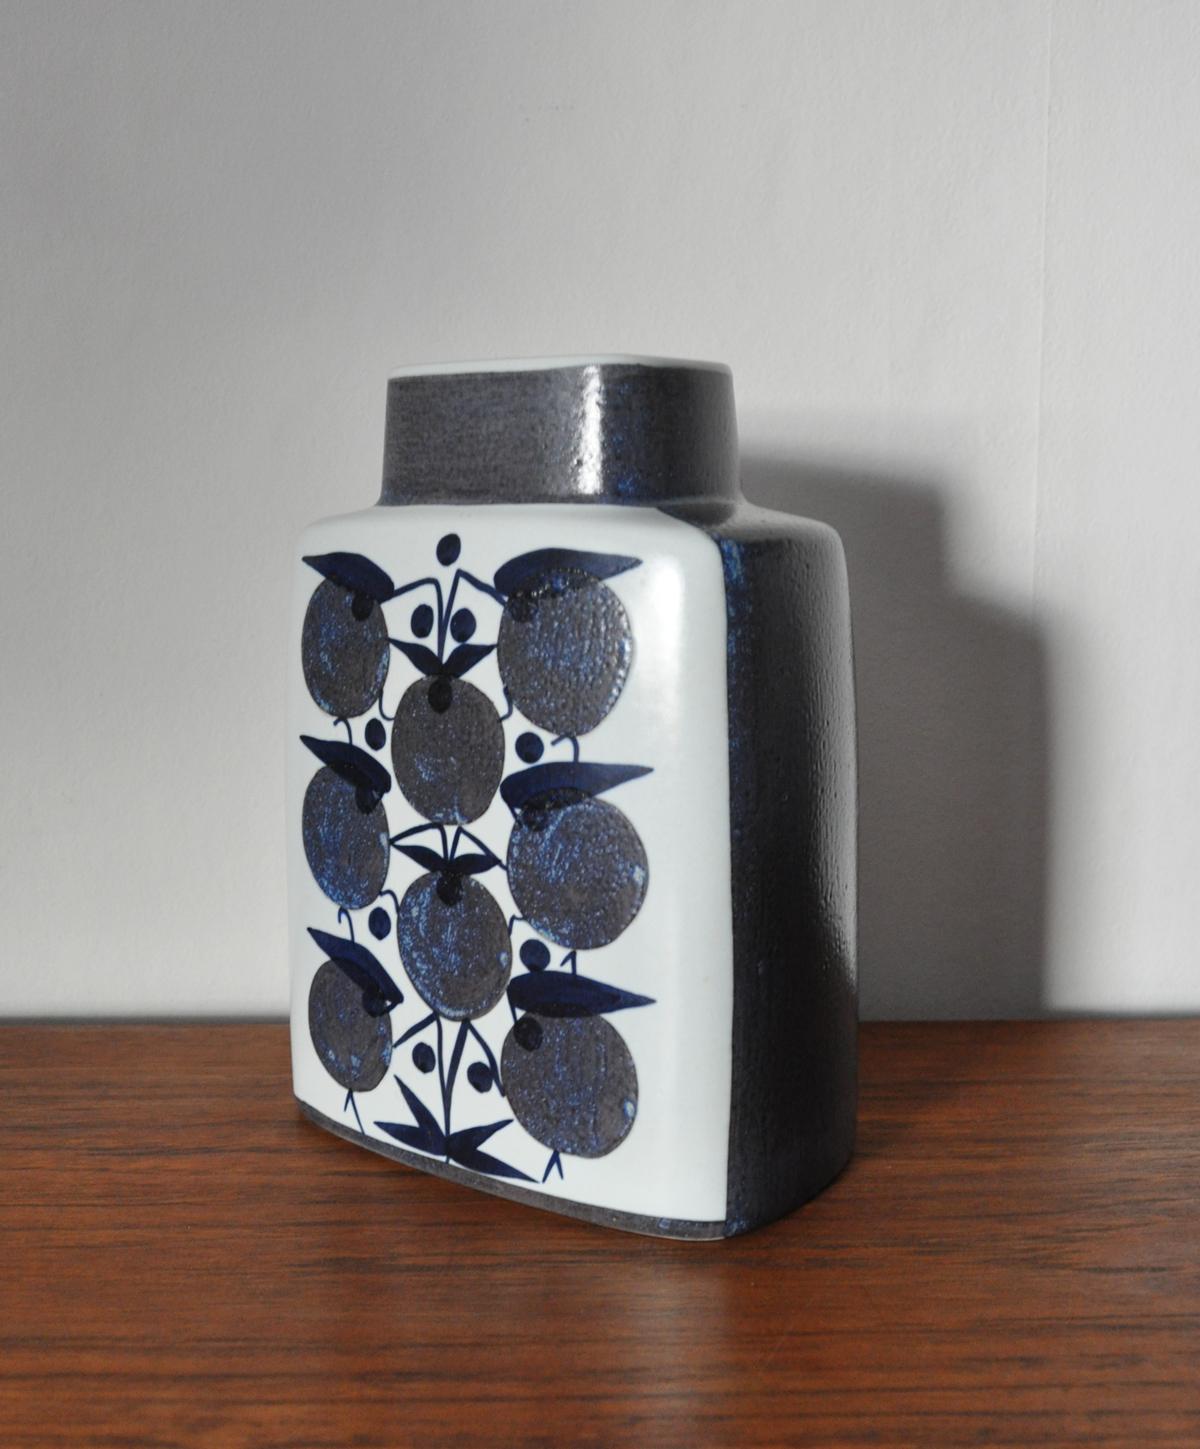 Baca fajance/ceramic vase designed by Grethe Helland Hansen and produced in 1960s at Royal Copenhagen, Denmark.
Complexed and detailed patterns which in creation from Scandinavia have become midcentury iconic fajance.
Stamped with Grethe Helland